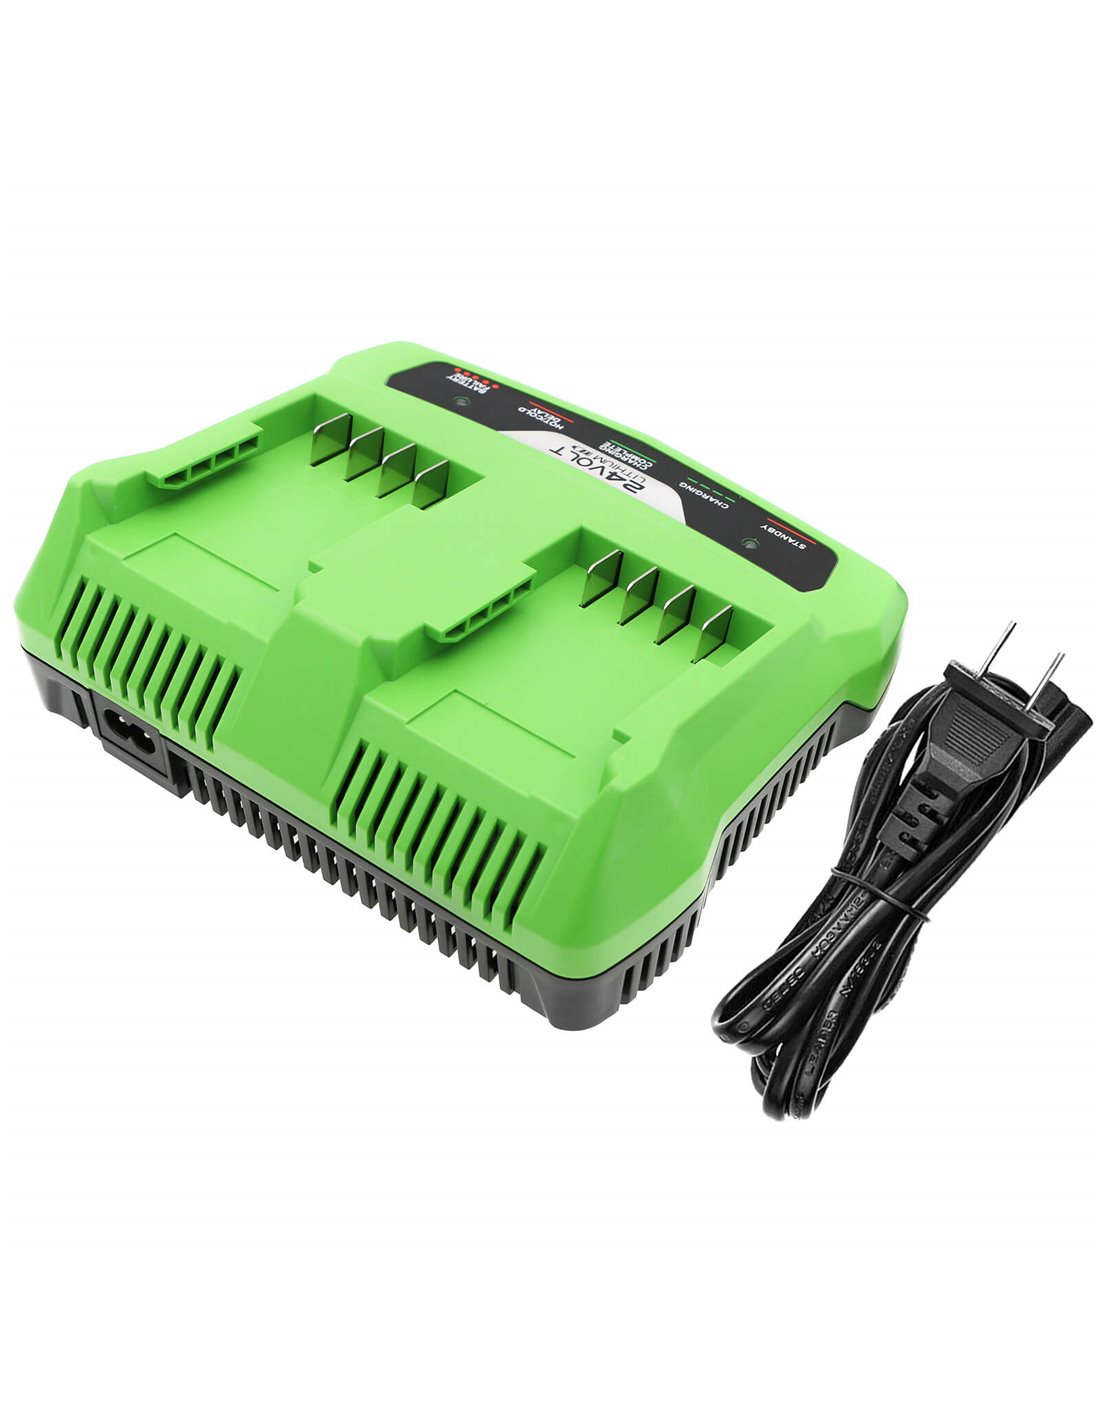 Charger fits Greenworks 10-inch Cordless Chainsaw 2036, 130mph Cordless G24 Sweeper, 2000007,